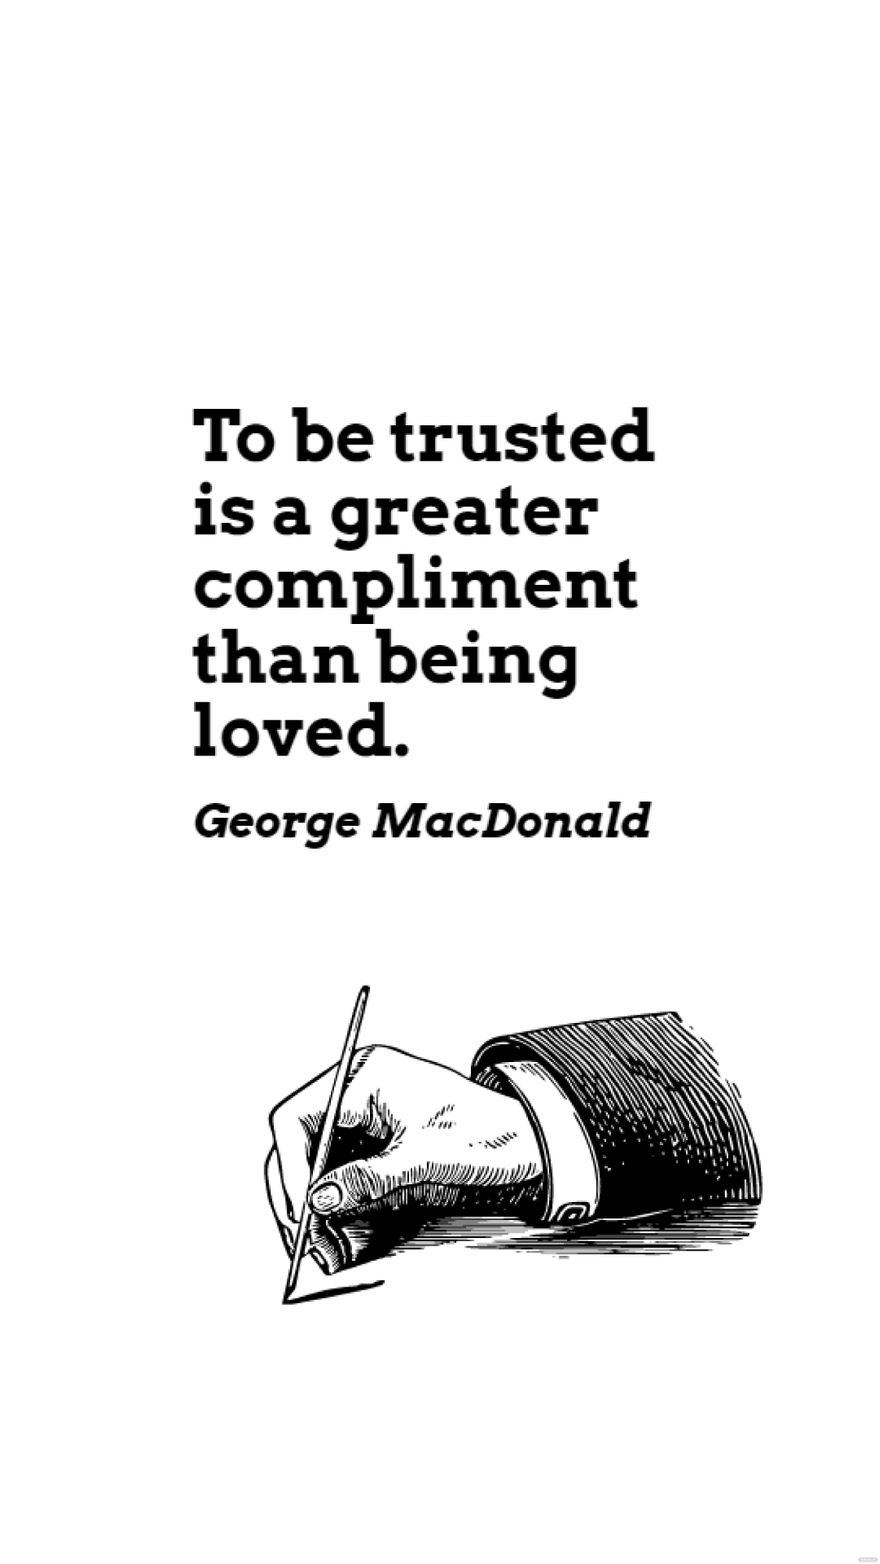 George MacDonald - To be trusted is a greater compliment than being loved.